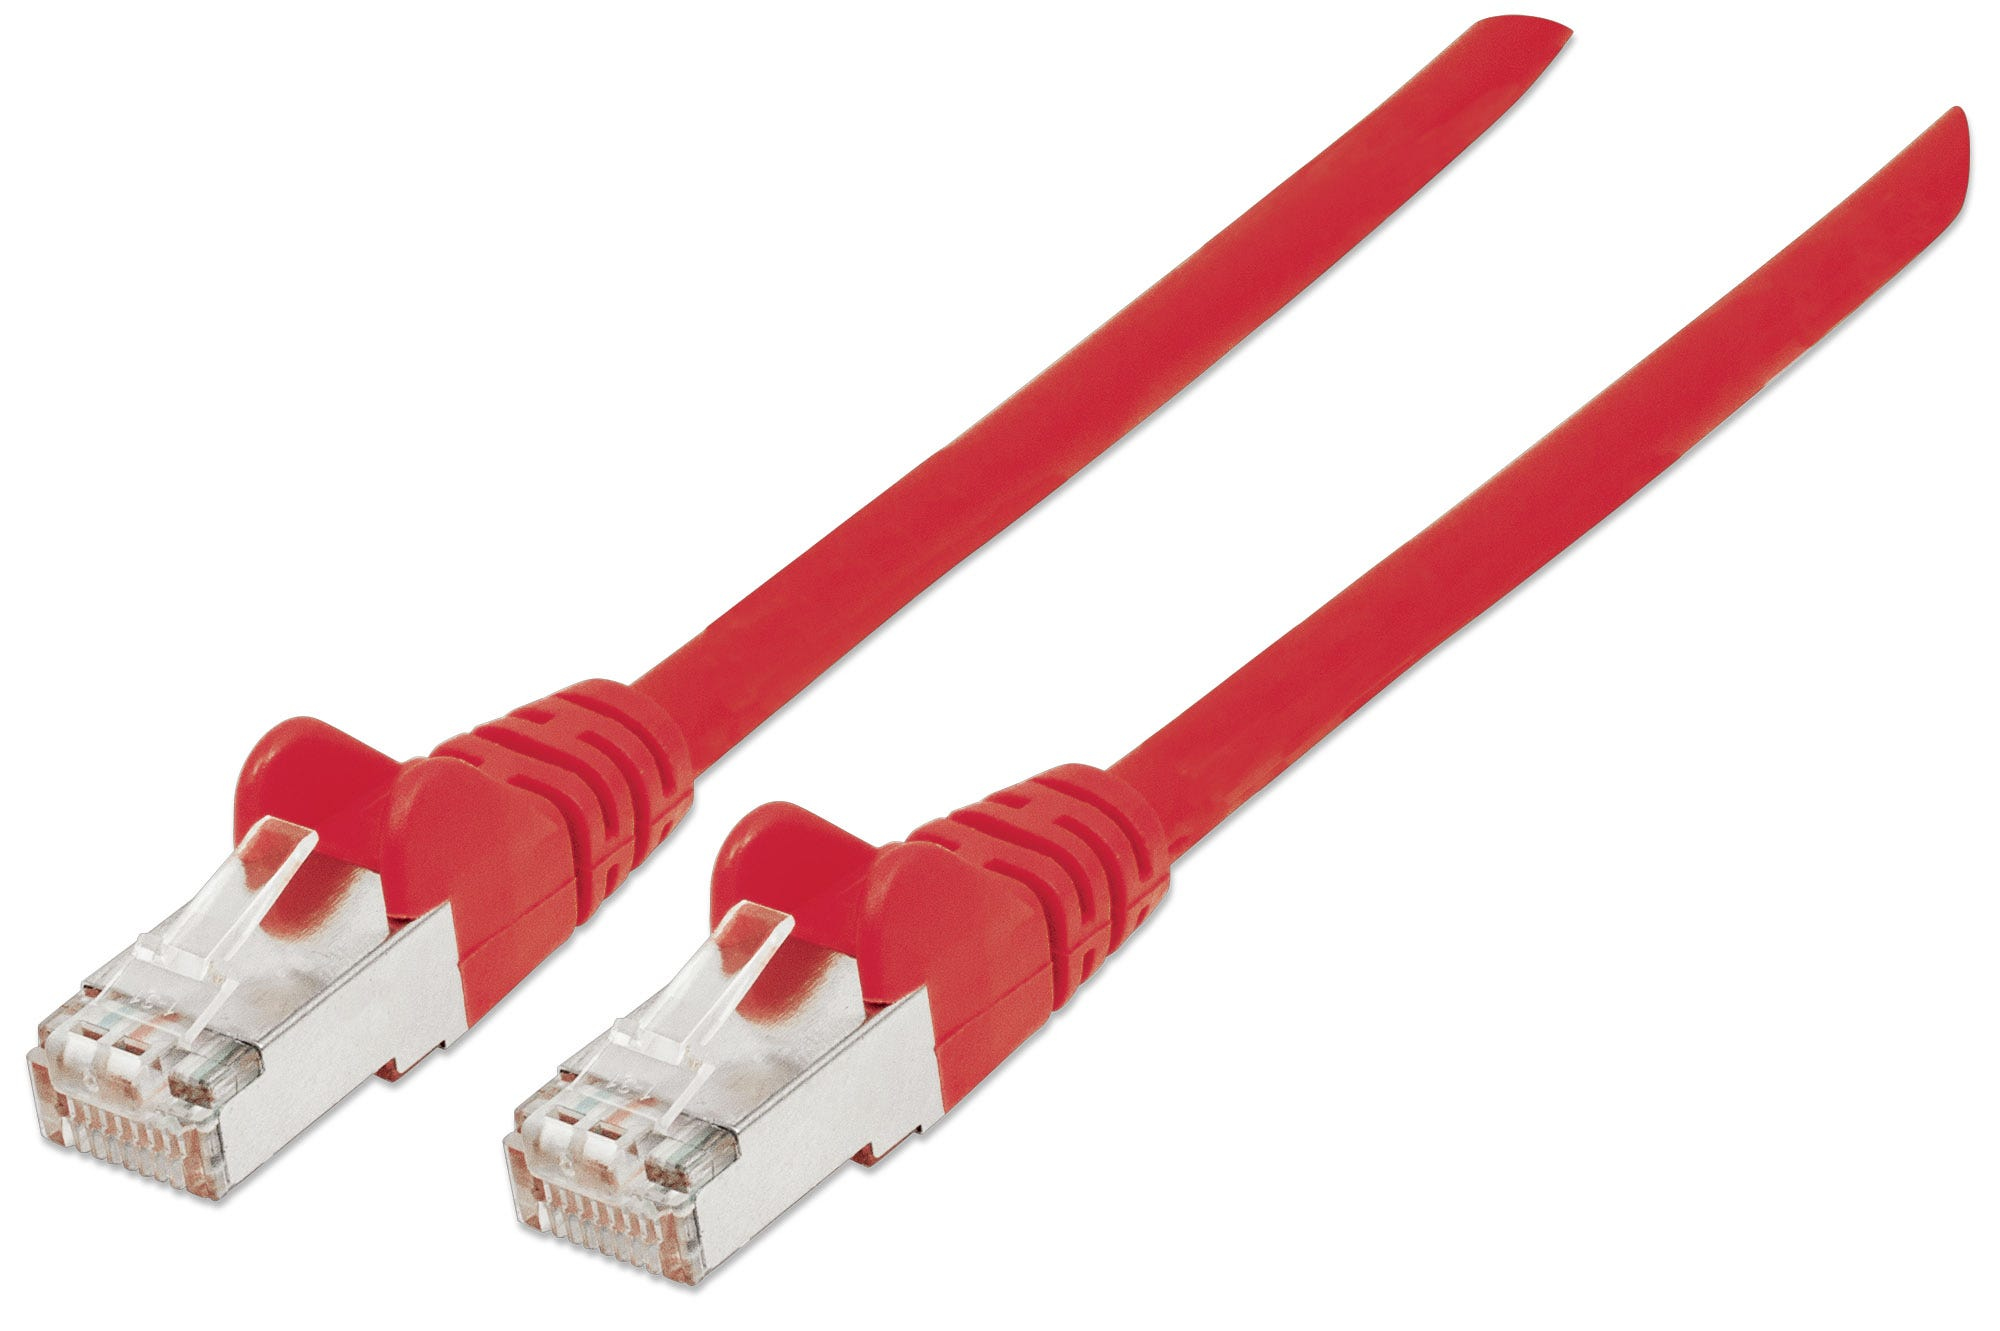 Photos - Cable (video, audio, USB) INTELLINET Network Patch Cable, Cat6A, 0.5m, Red, Copper, S/FTP, LSOH 3190 